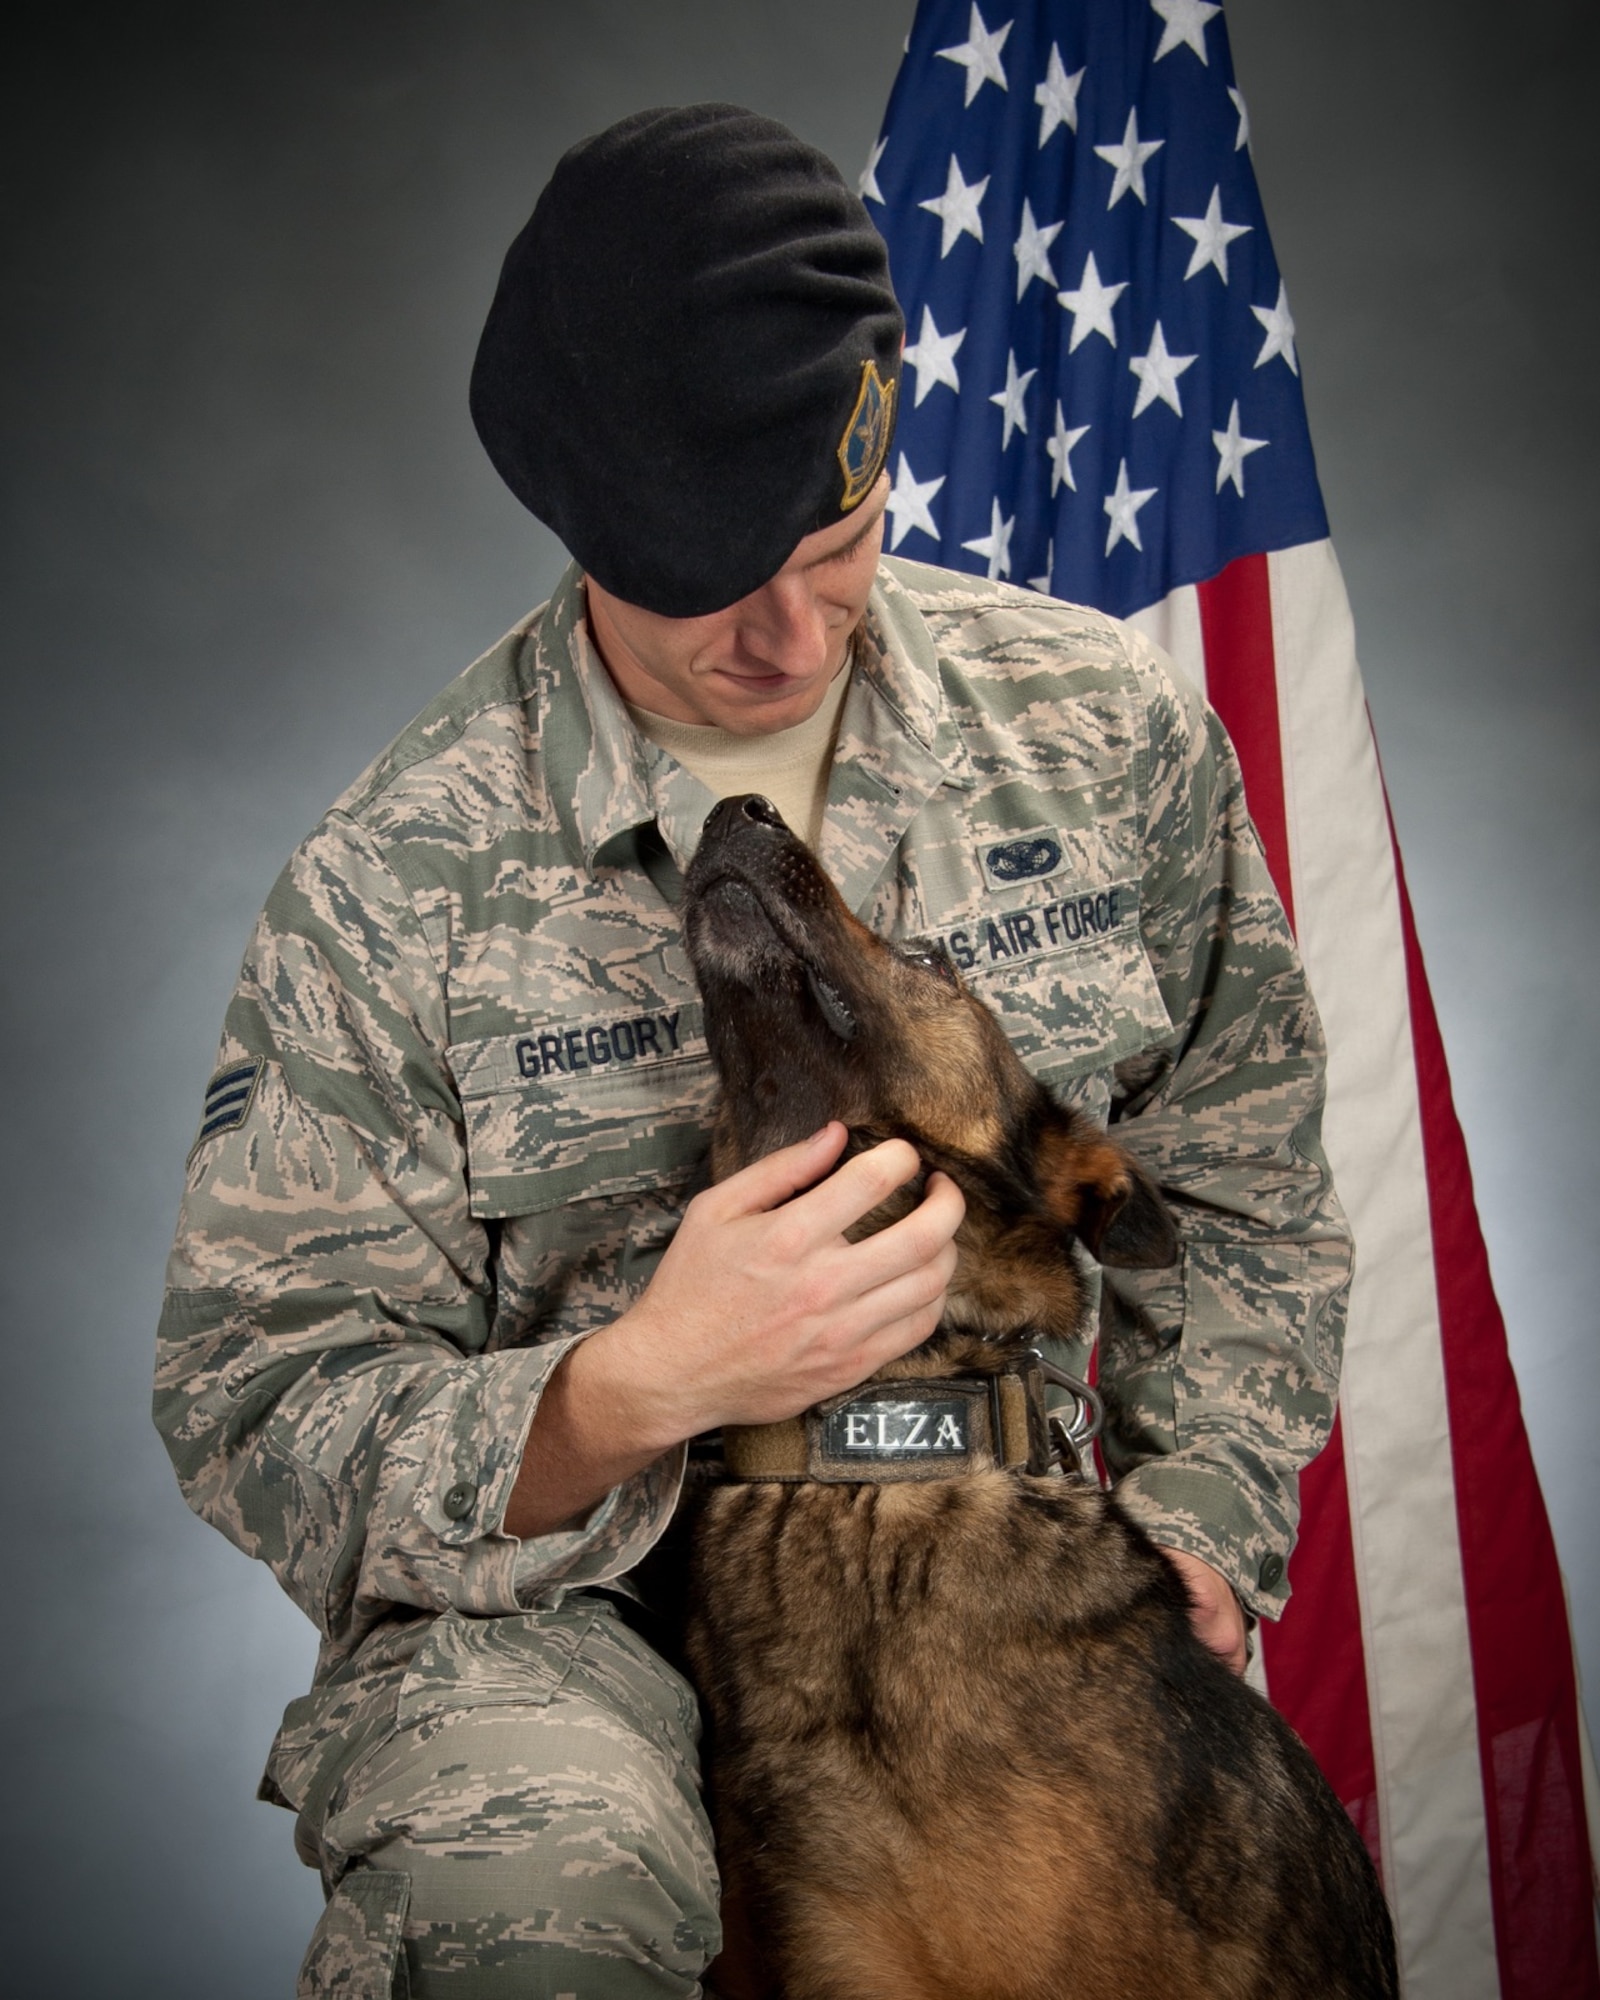 Senior Airman Clinton Gregory, 42nd Security Forces Squadron military working dog handler, with his MWD Elza at Maxwell Air Force Base, Ala. Gregory said this photo illustrates Elza’s playful nature and the bond the two had formed while working together. Elza succumbed to cancer in early July 2017 months before she was set to retire. (Courtesy photo)